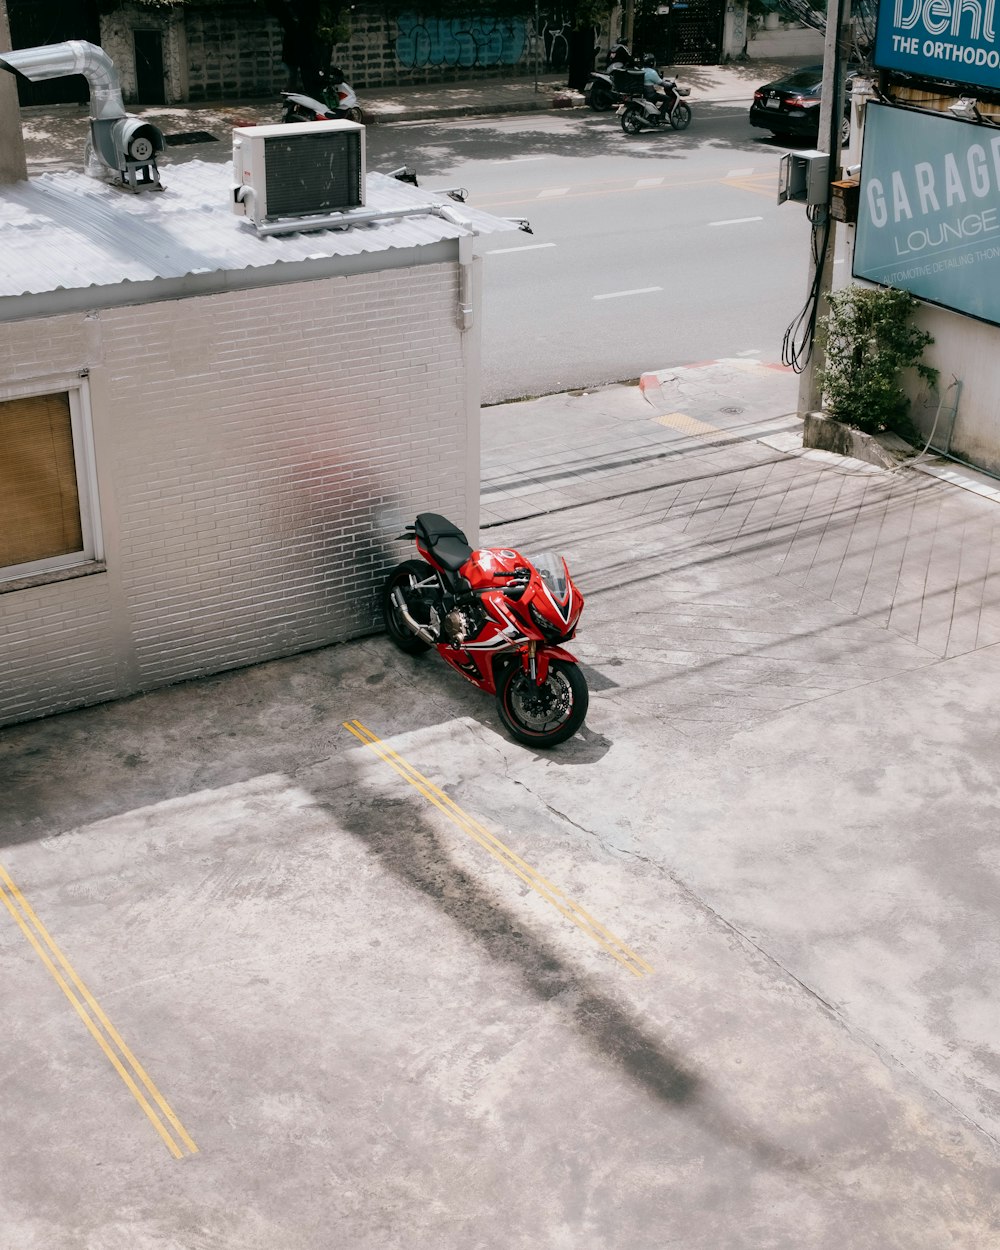 a red motorcycle parked in a parking lot next to a building